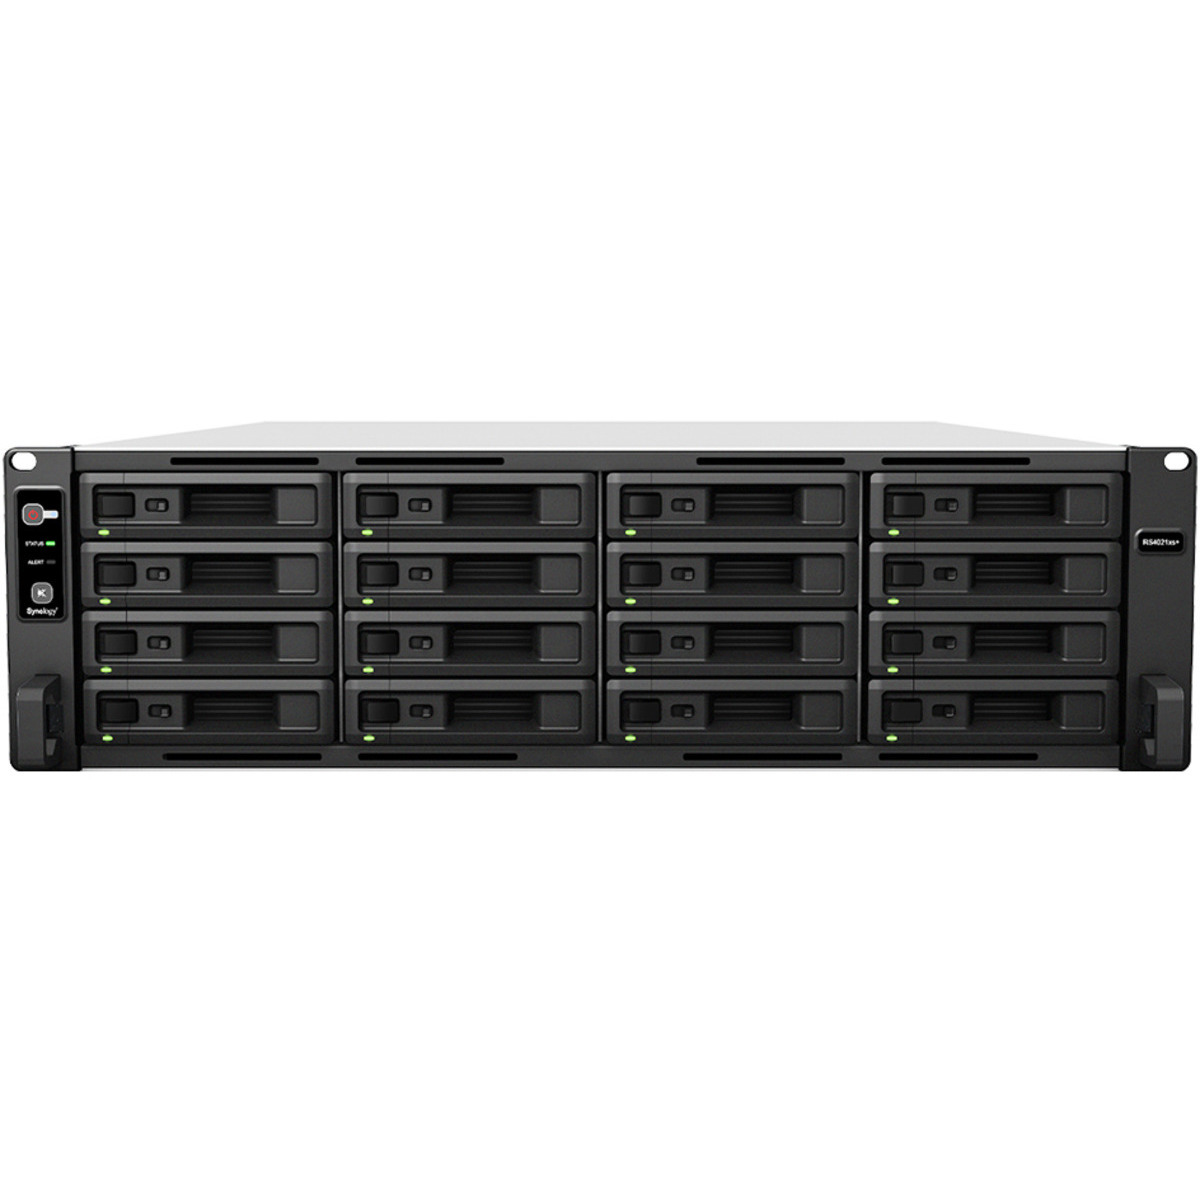 buy $8485 Synology RackStation RS4021xs+ 32tb RackMount NAS - Network Attached Storage Device 16x2000gb Western Digital Red Plus WD20EFZX 3.5 5400rpm SATA 6Gb/s HDD NAS Class Drives Installed - Burn-In Tested - nas headquarters buy network attached storage server device das new raid-5 free shipping usa christmas new year holiday sale RackStation RS4021xs+